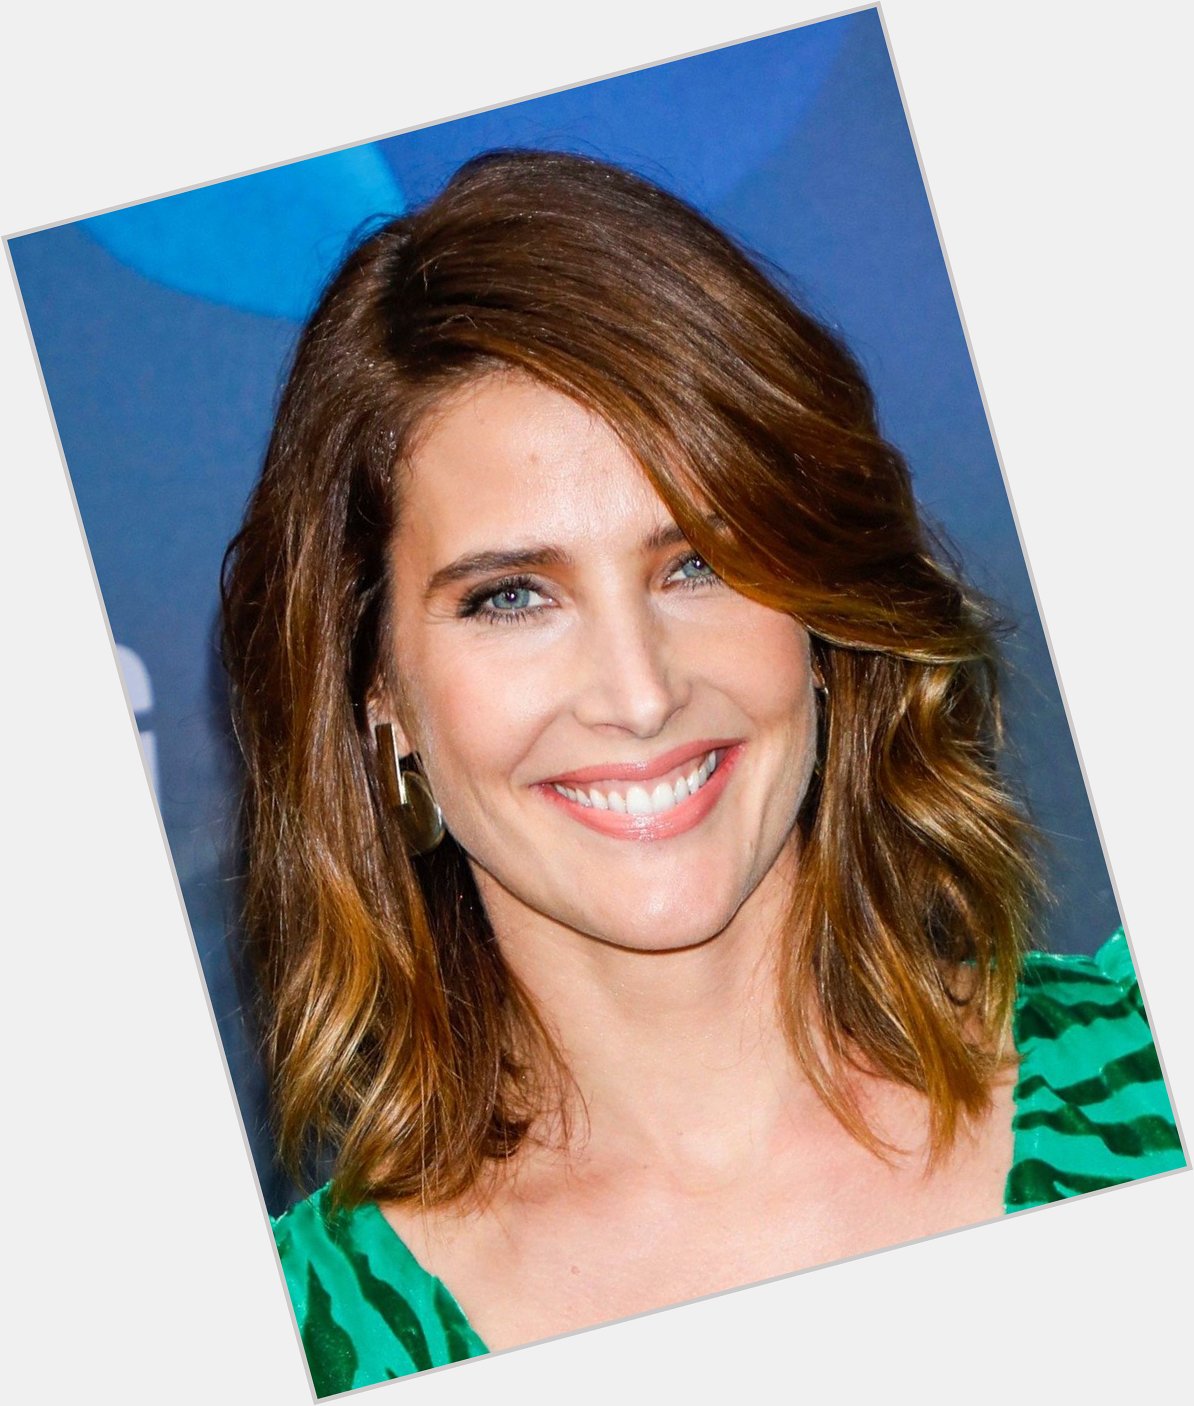 Happy 38th to the beautifully underrated Cobie Smulders. Hope you have an Epictastic birthday 